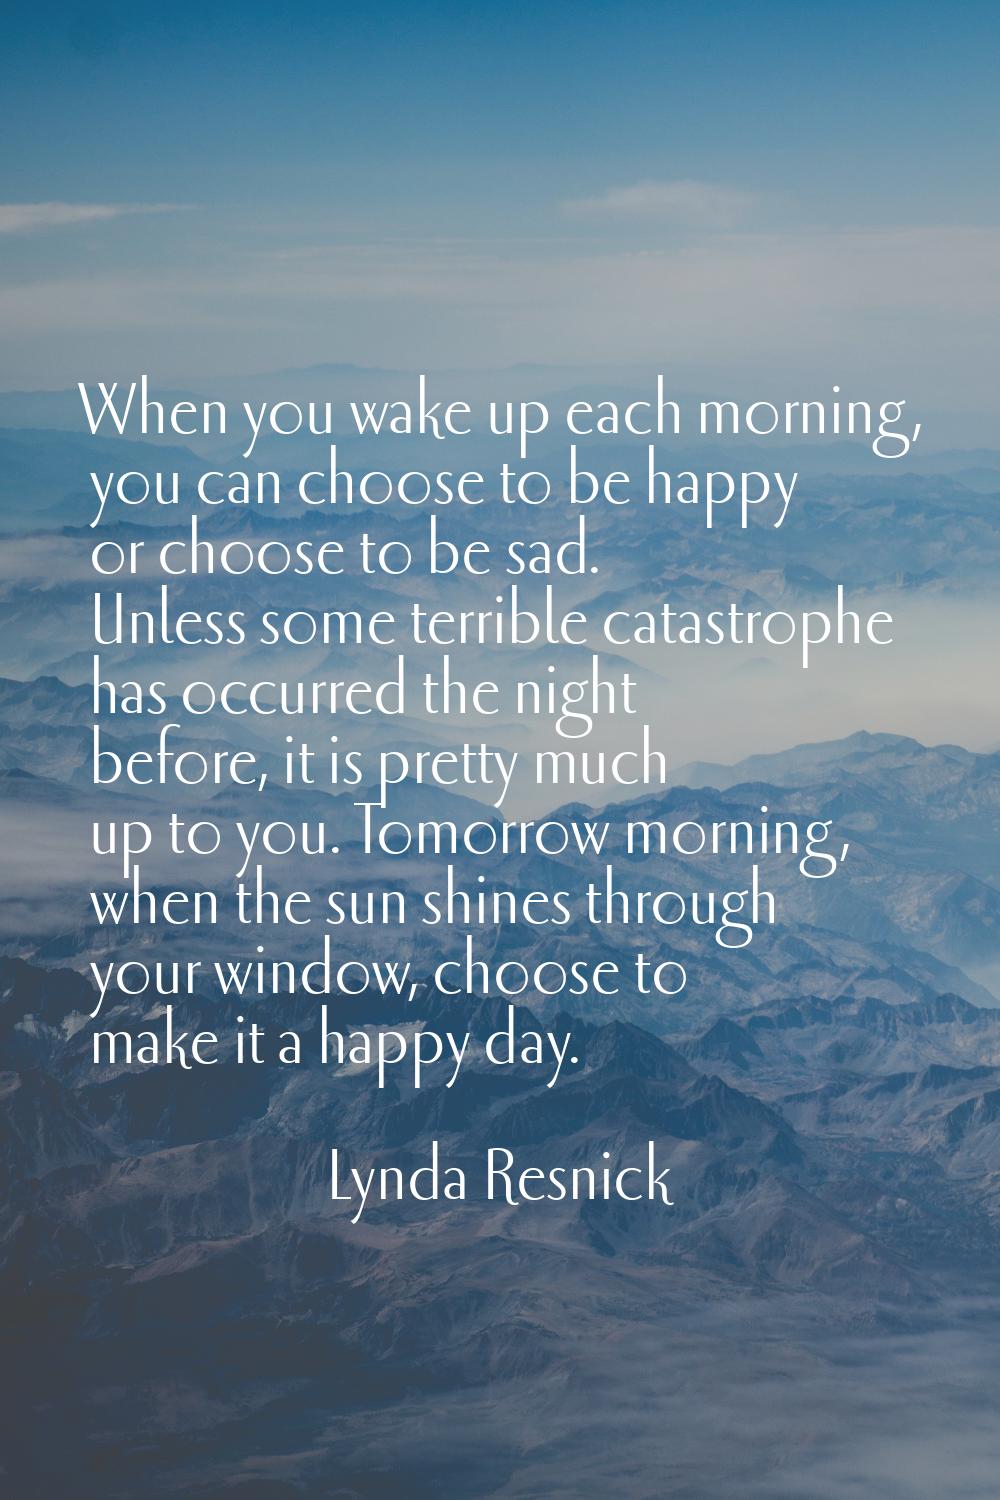 When you wake up each morning, you can choose to be happy or choose to be sad. Unless some terrible